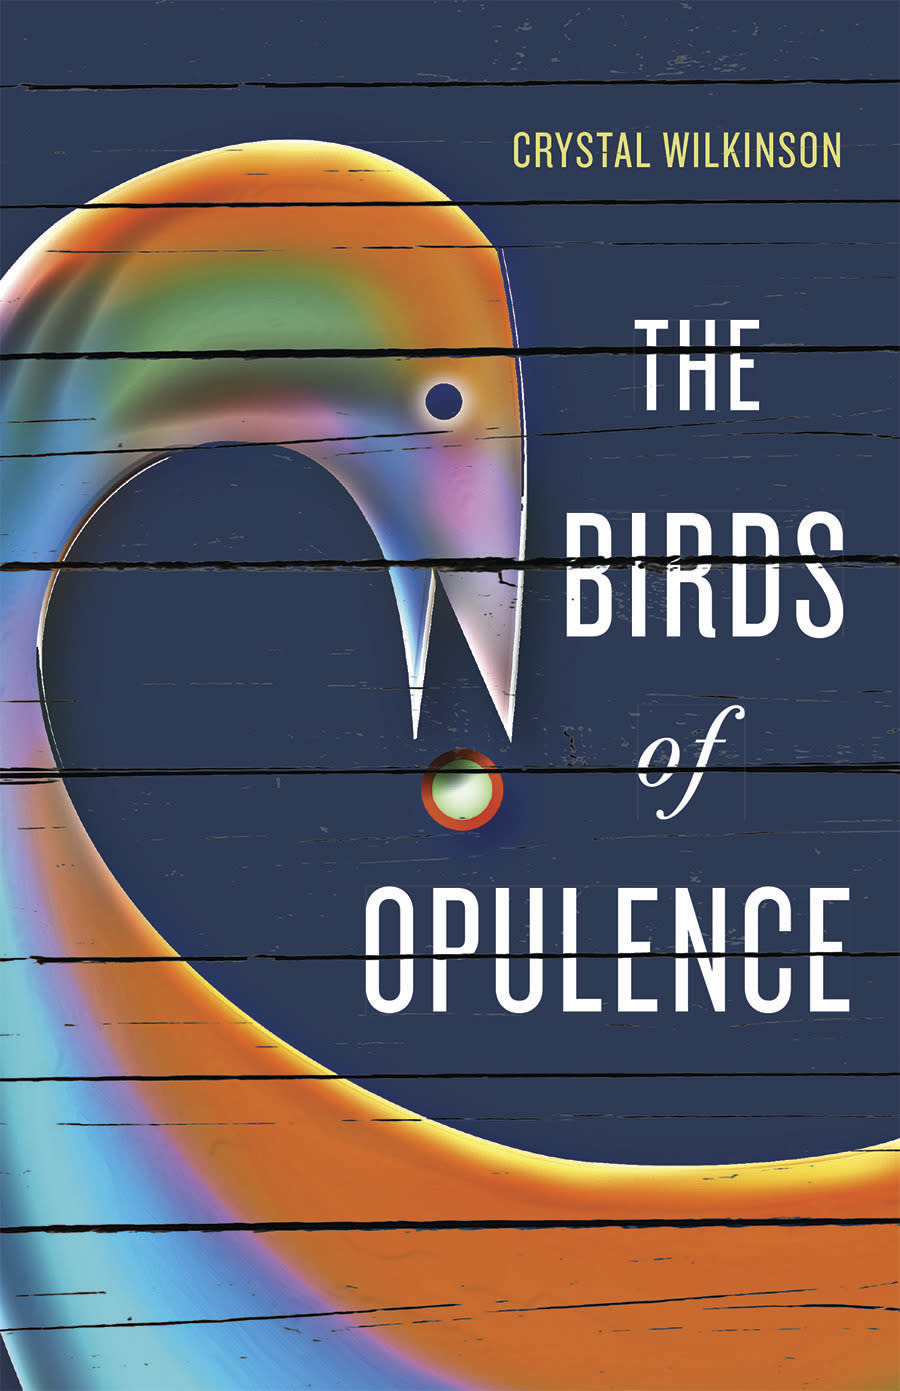 This book cover image released by University Press of Kentucky shows "The Birds of Opulence," by Crystal Wilkinson. The book, explores generations of troubled women in the fictional Southern black township of Opulence, is the winner of the 2016 Ernest J. Gaines Award for Literary Excellence. (University Press of Kentucky via AP)